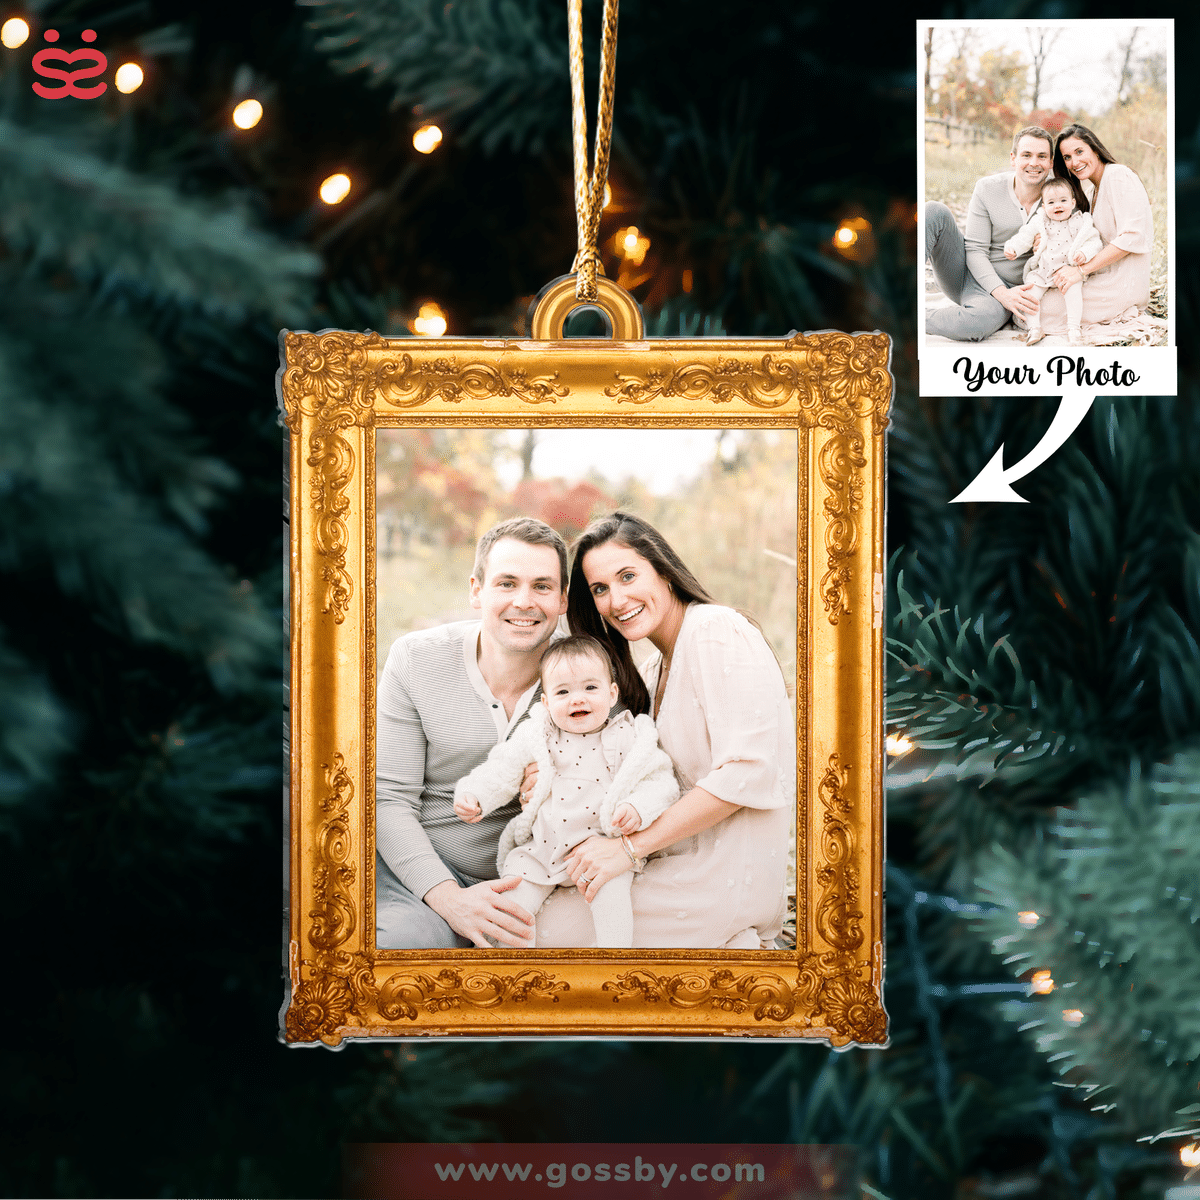 Xmas Ornament - Photo Frame Keepsake Ornament - Customized Your Photo Ornaments - Couple Photo Gifts, Christmas Gifts for Couple_3